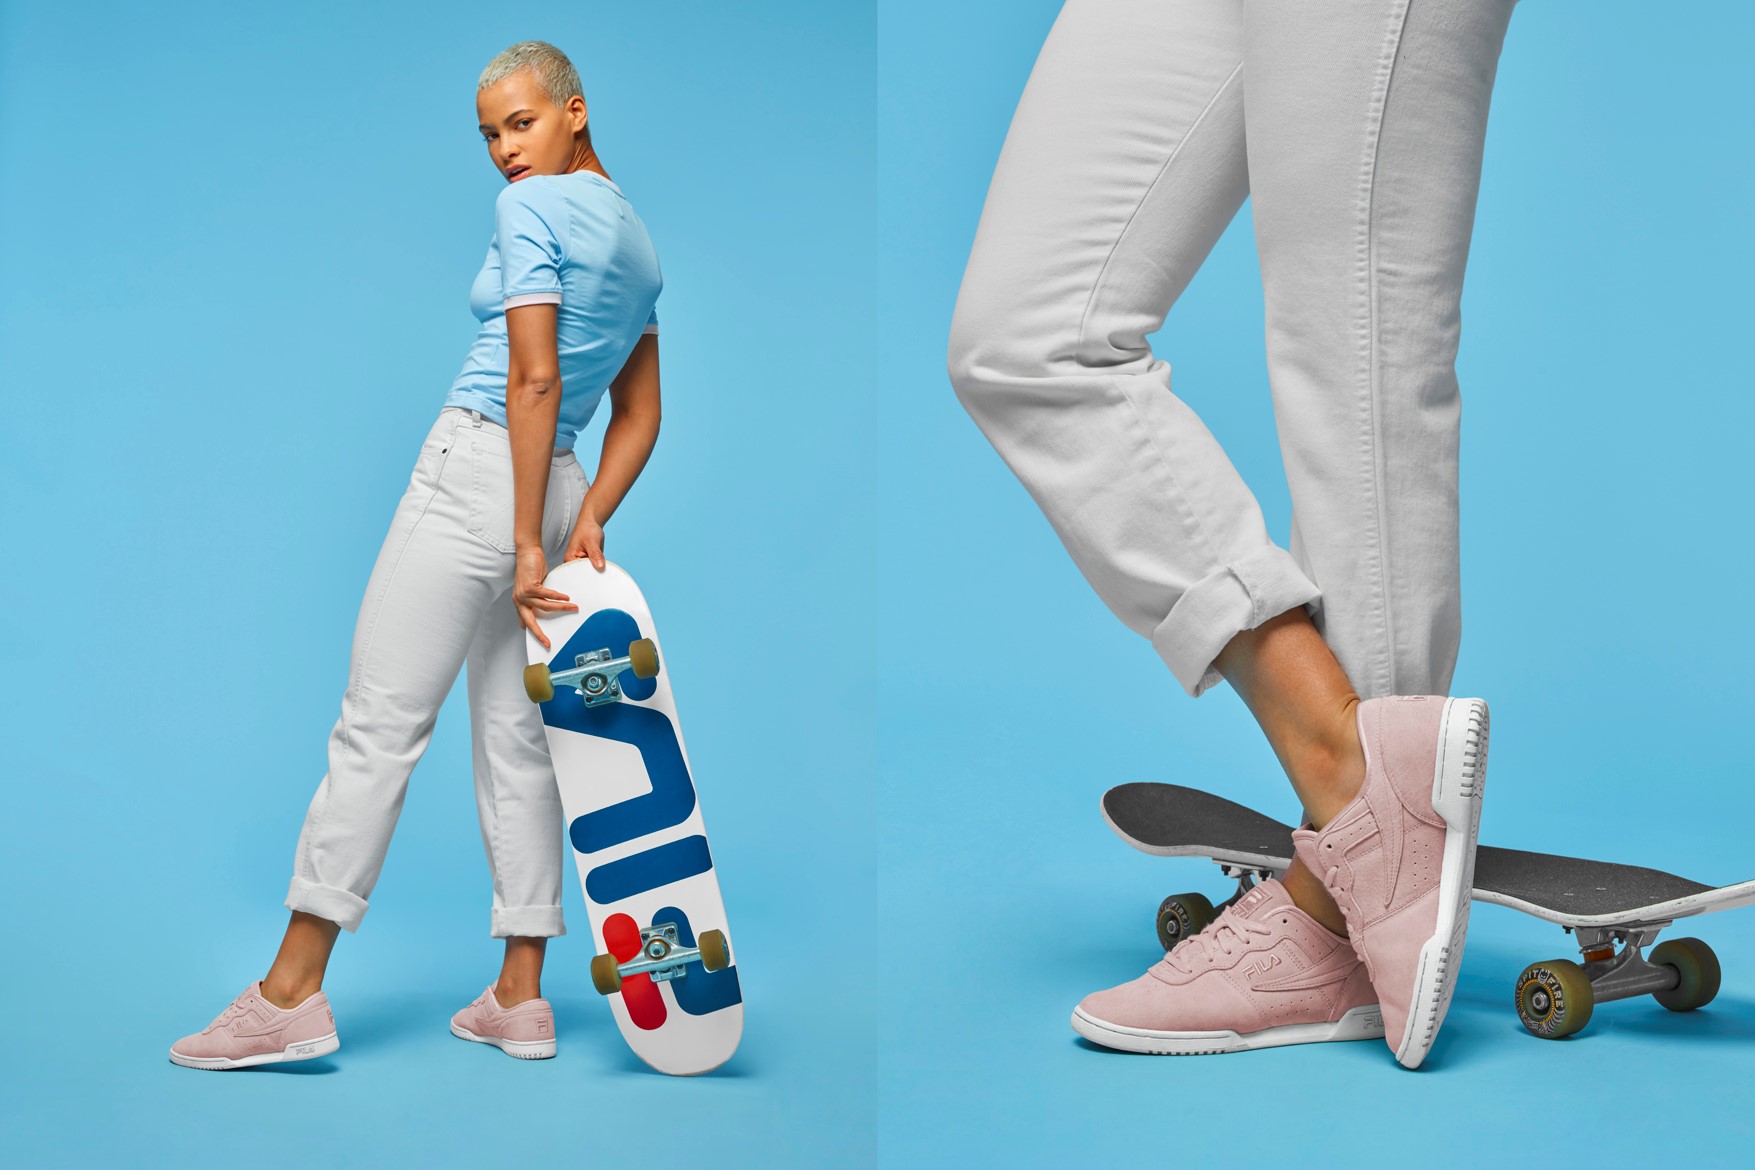 Launches New Women's Footwear Collection for '17